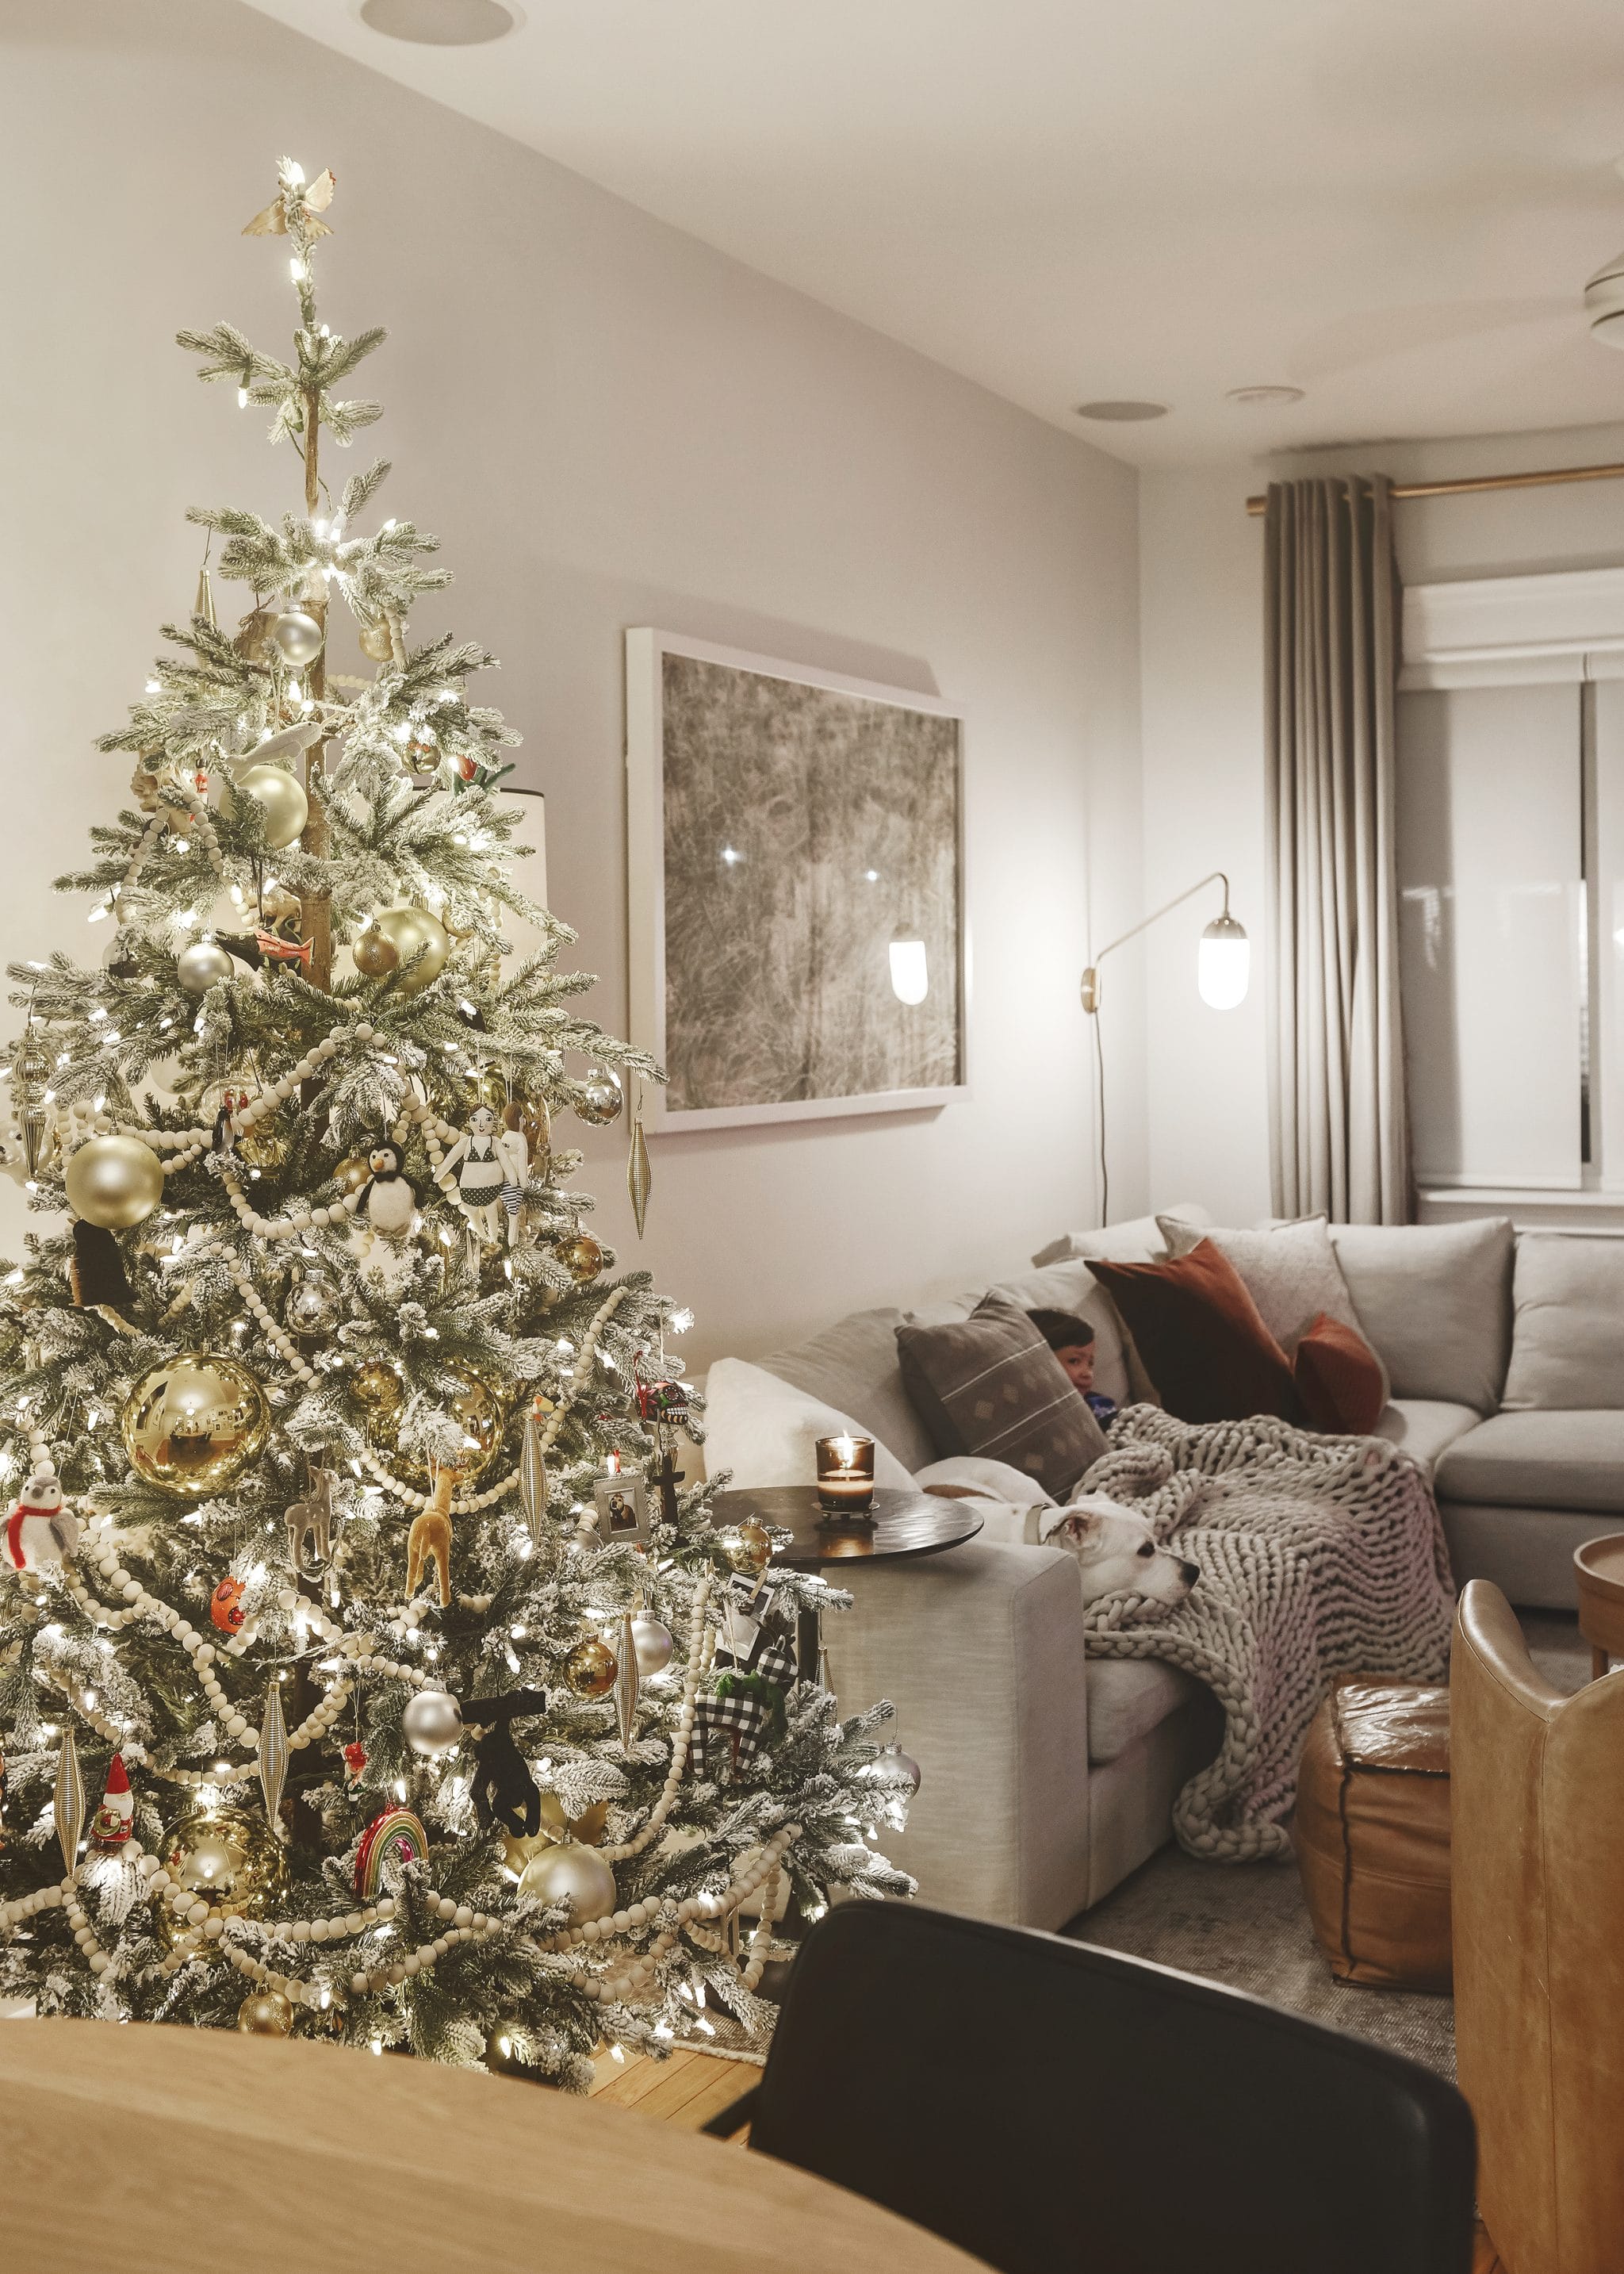 Our Christmas tree in a cozy living room, via Yellow Brick Home